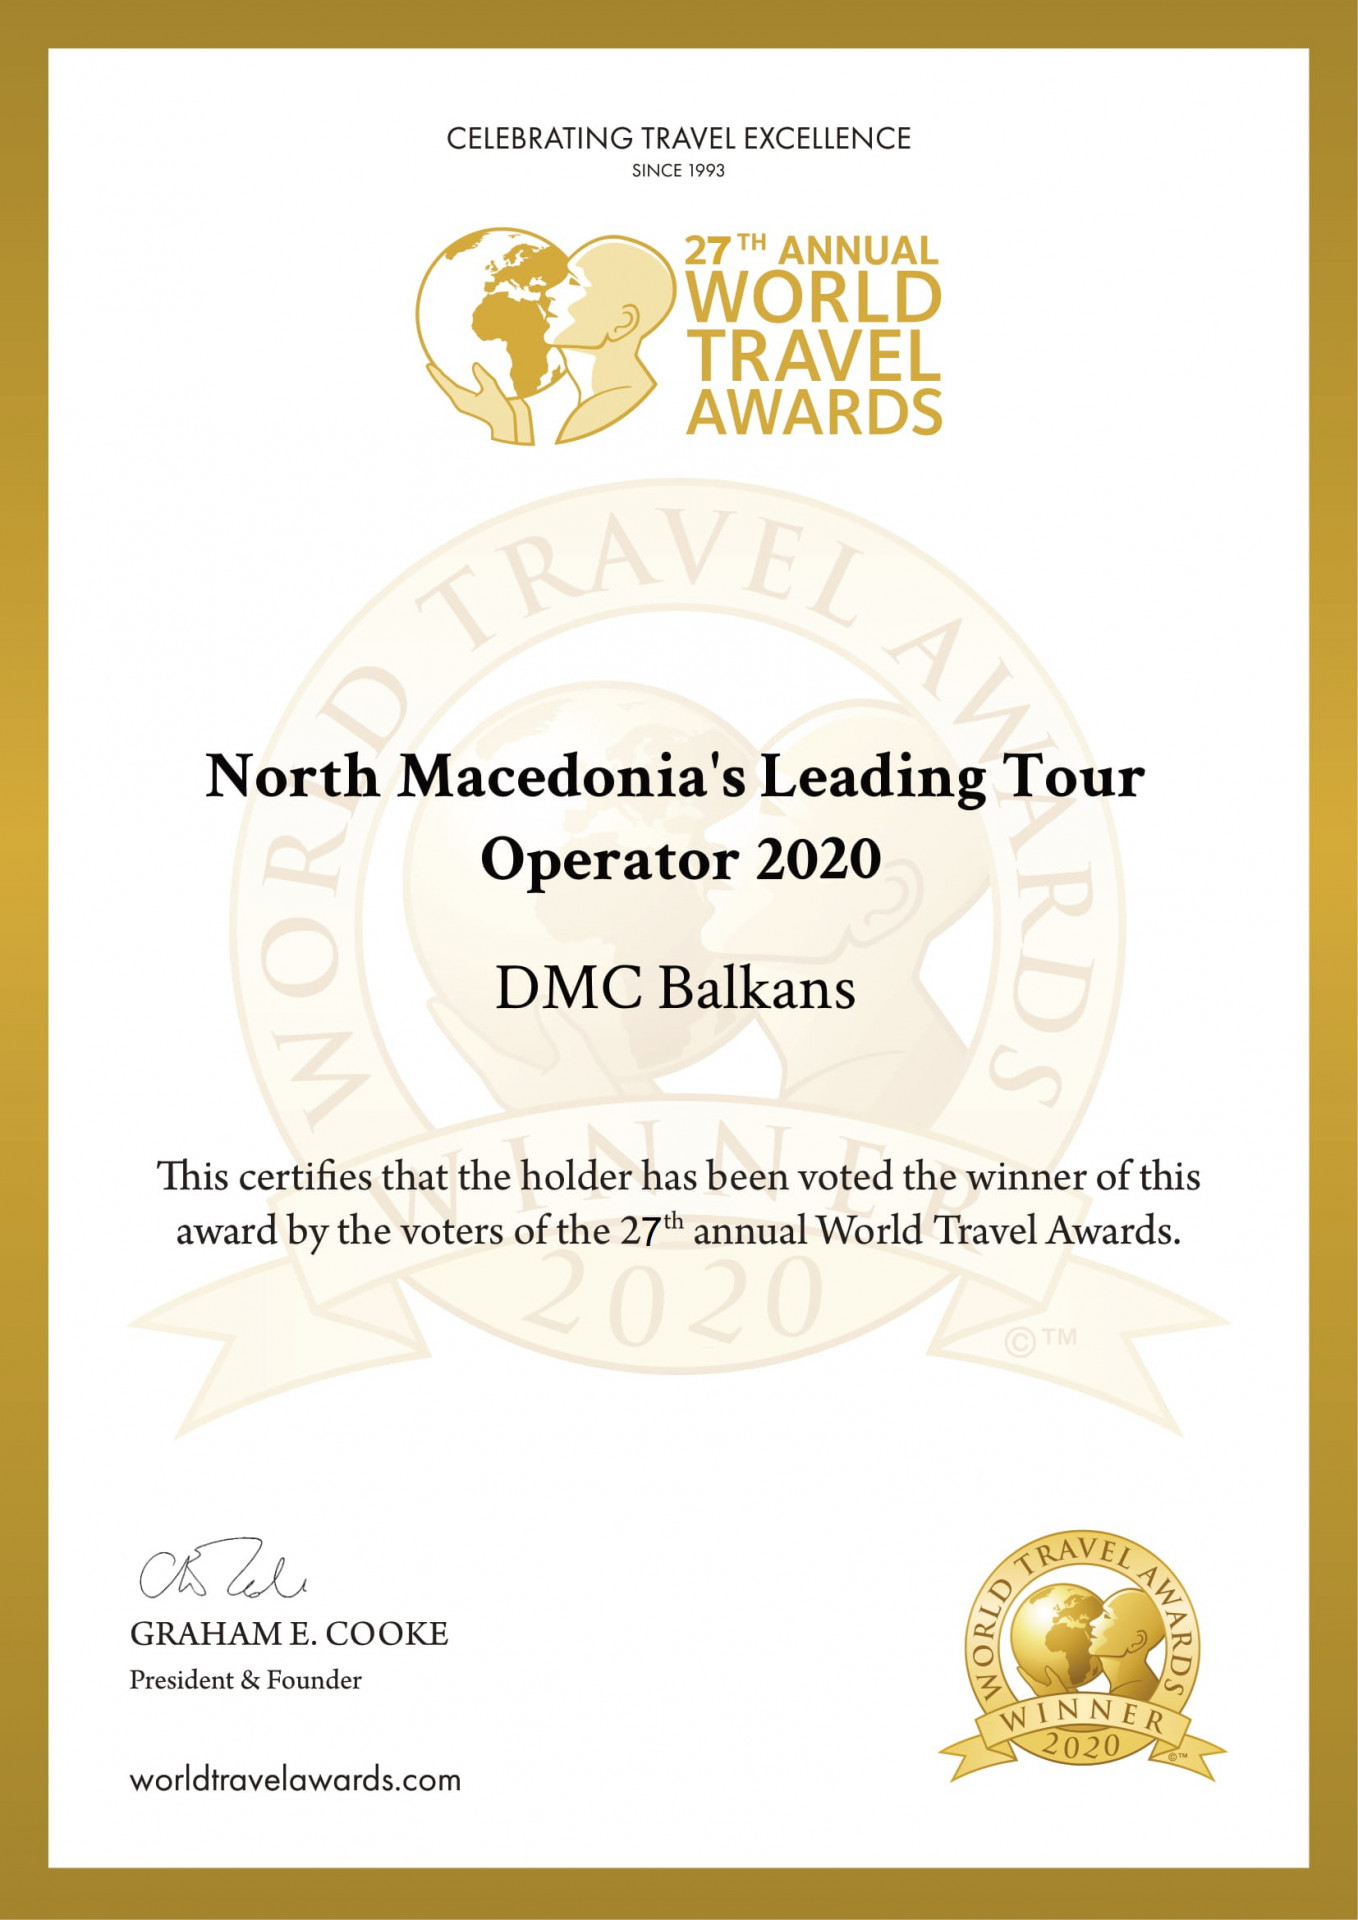 DMC Balkans Travel & Events -The best 2020 inbound tour operator for N.Macedonia and the Bal